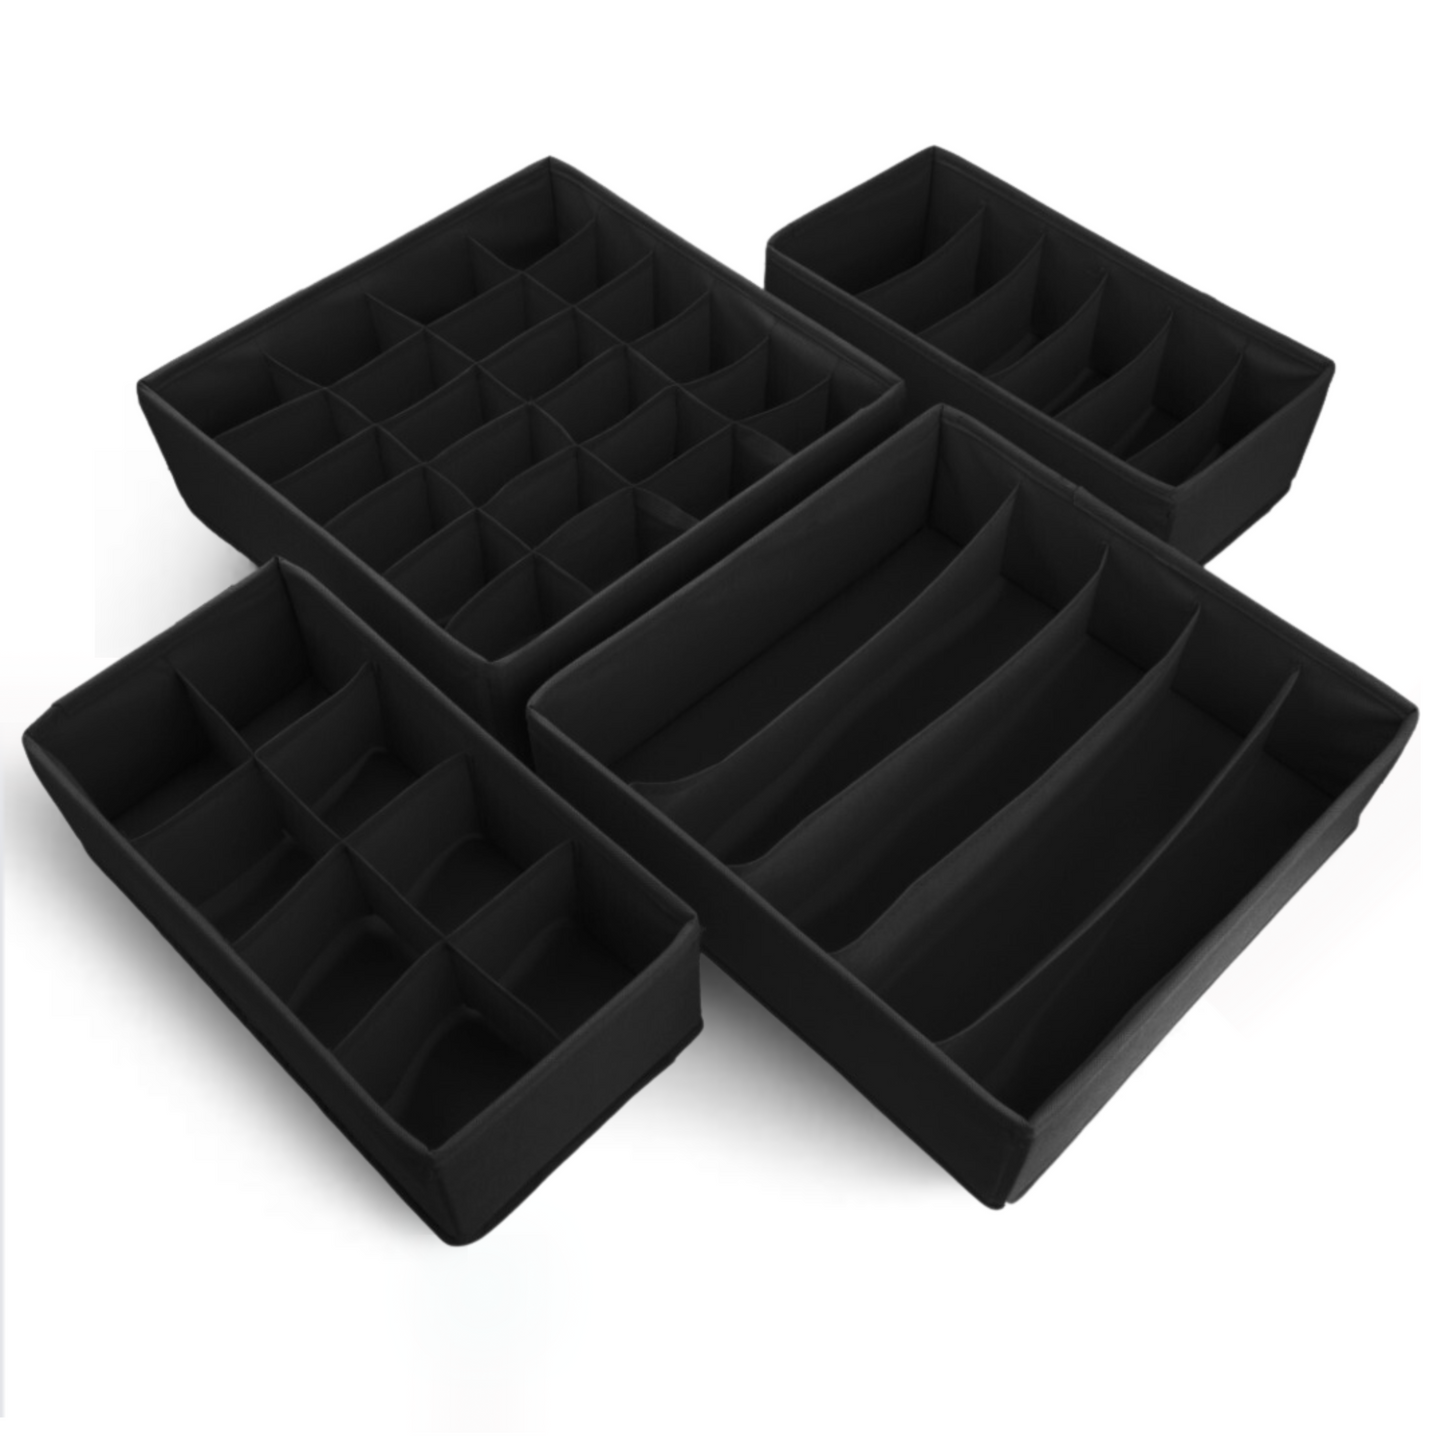 Qoolish 4-Pack Undergarments Drawer Organizers (Available in 5 Colors)